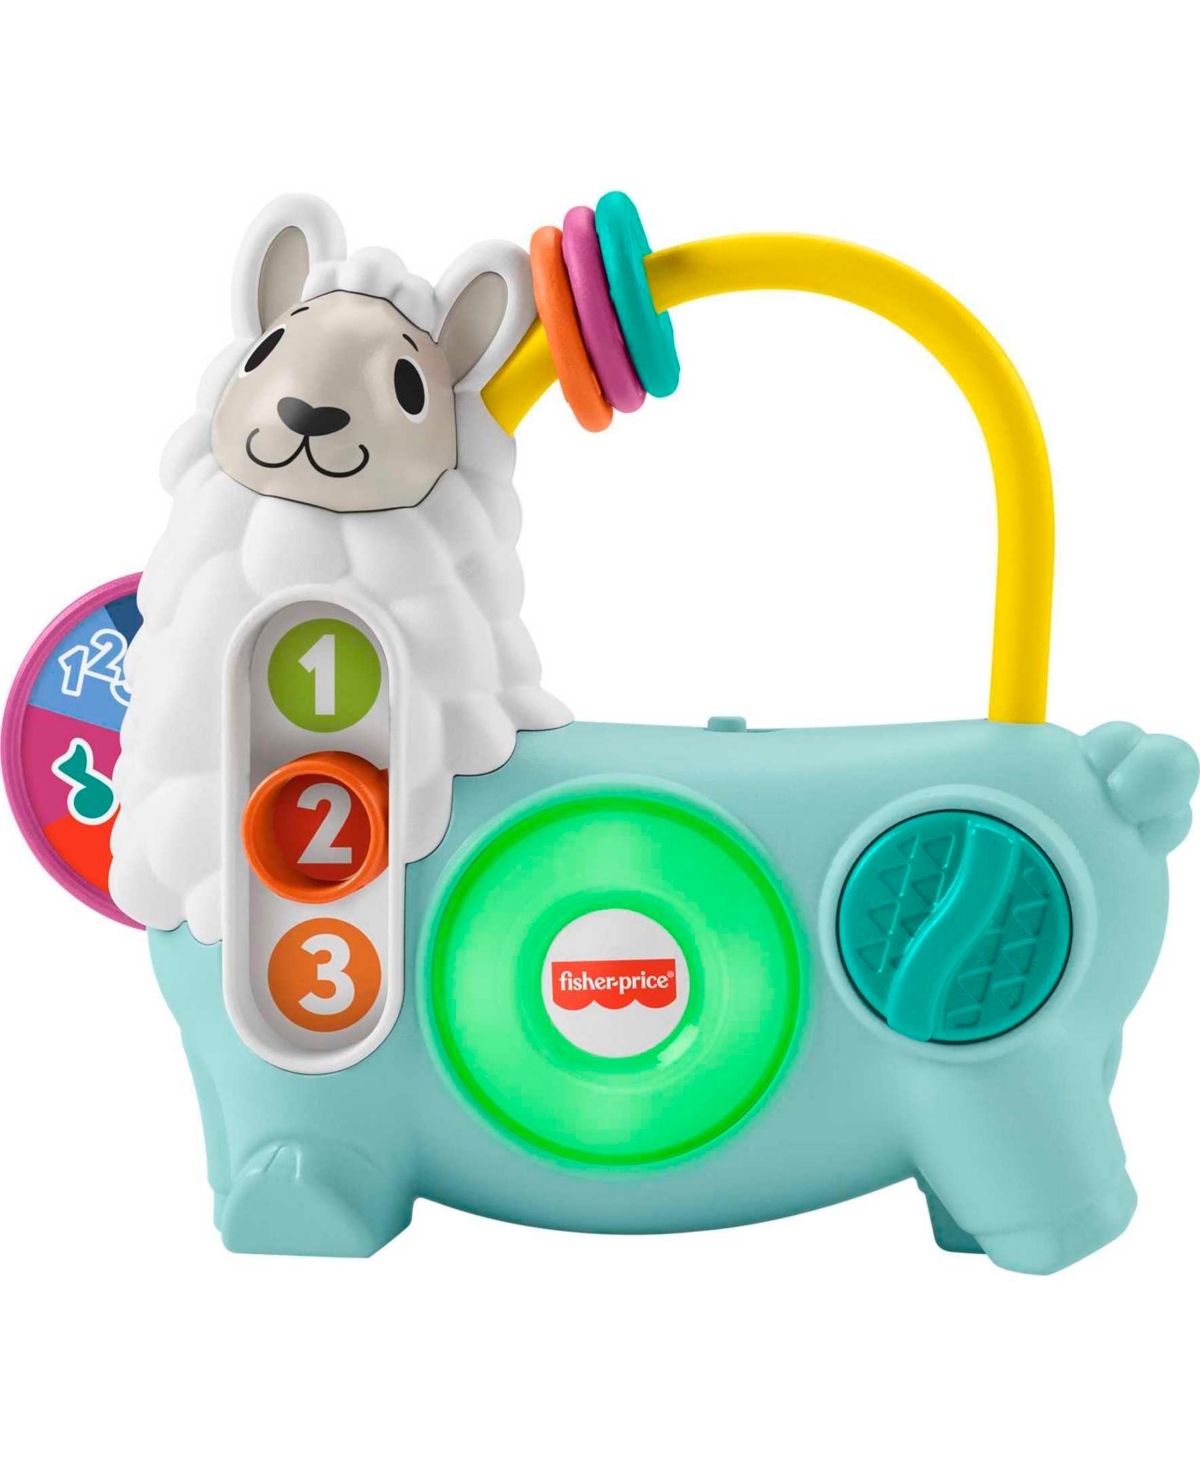 Fisher Price Kids' Fisher-price Linkimals 123 Activity Llama In Multi-color